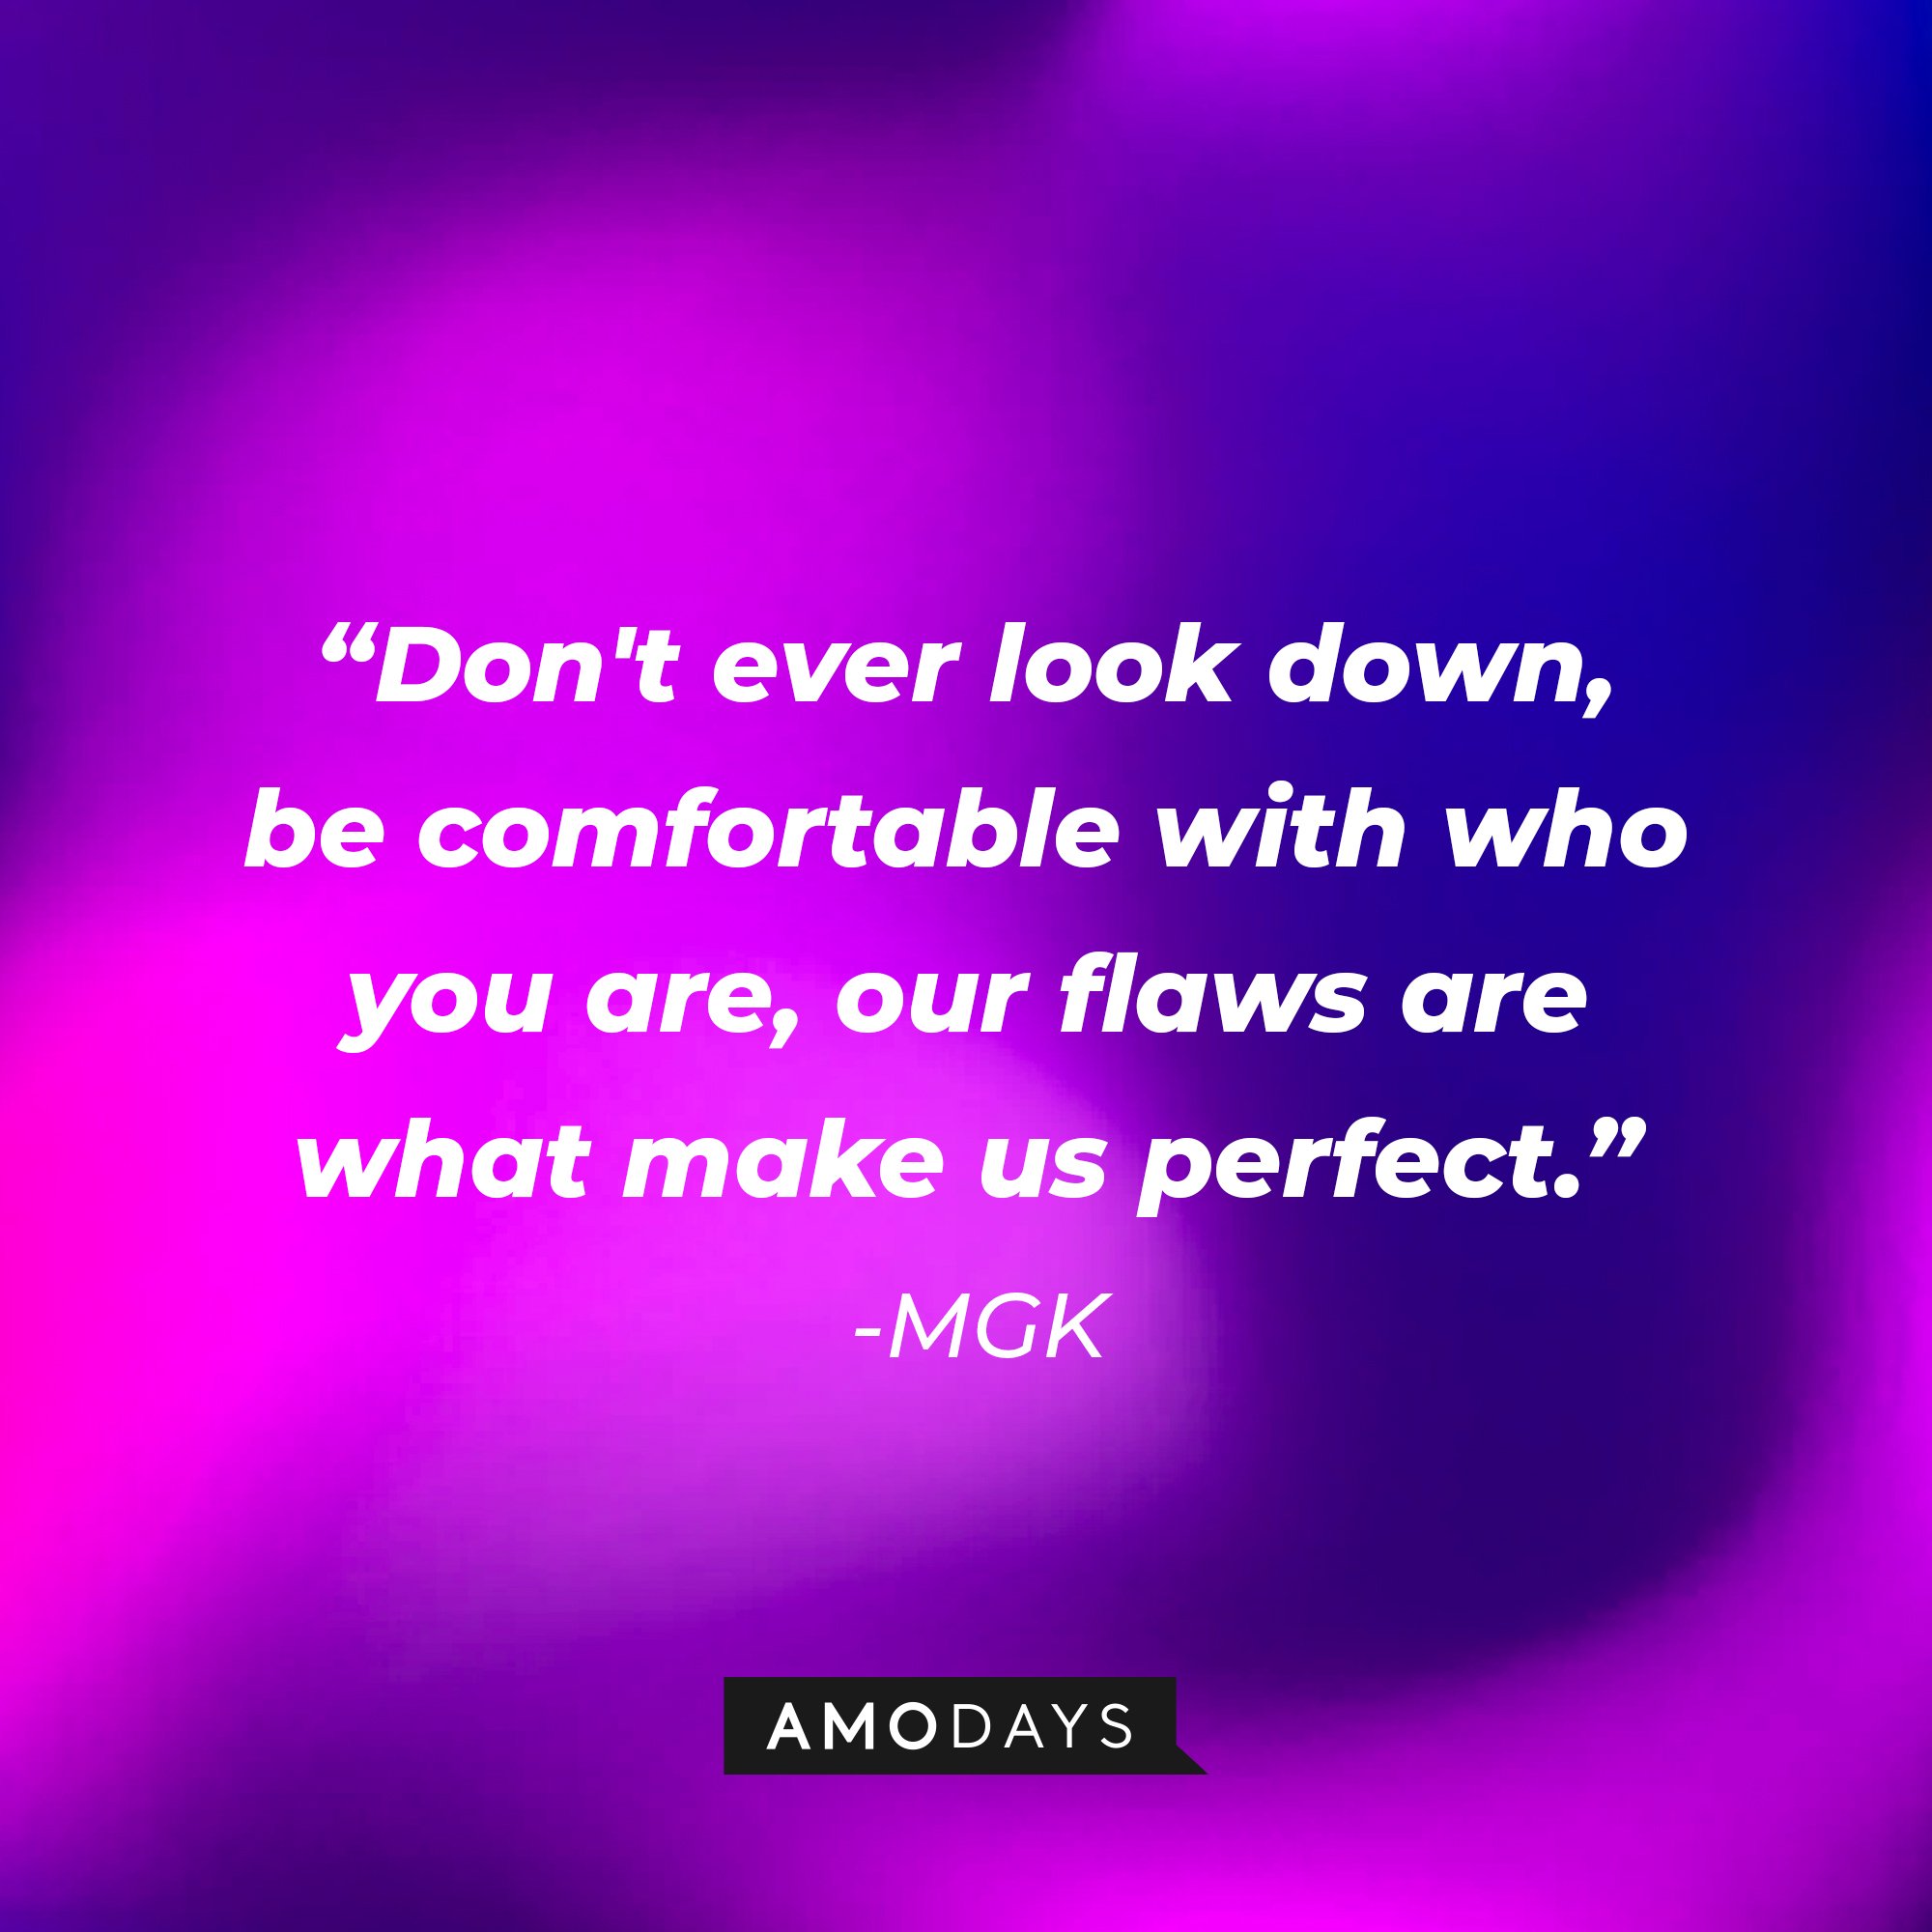 MGK's quote: "Don't ever look down, be comfortable with who you are, our flaws are what make us perfect." | Image: AmoDays